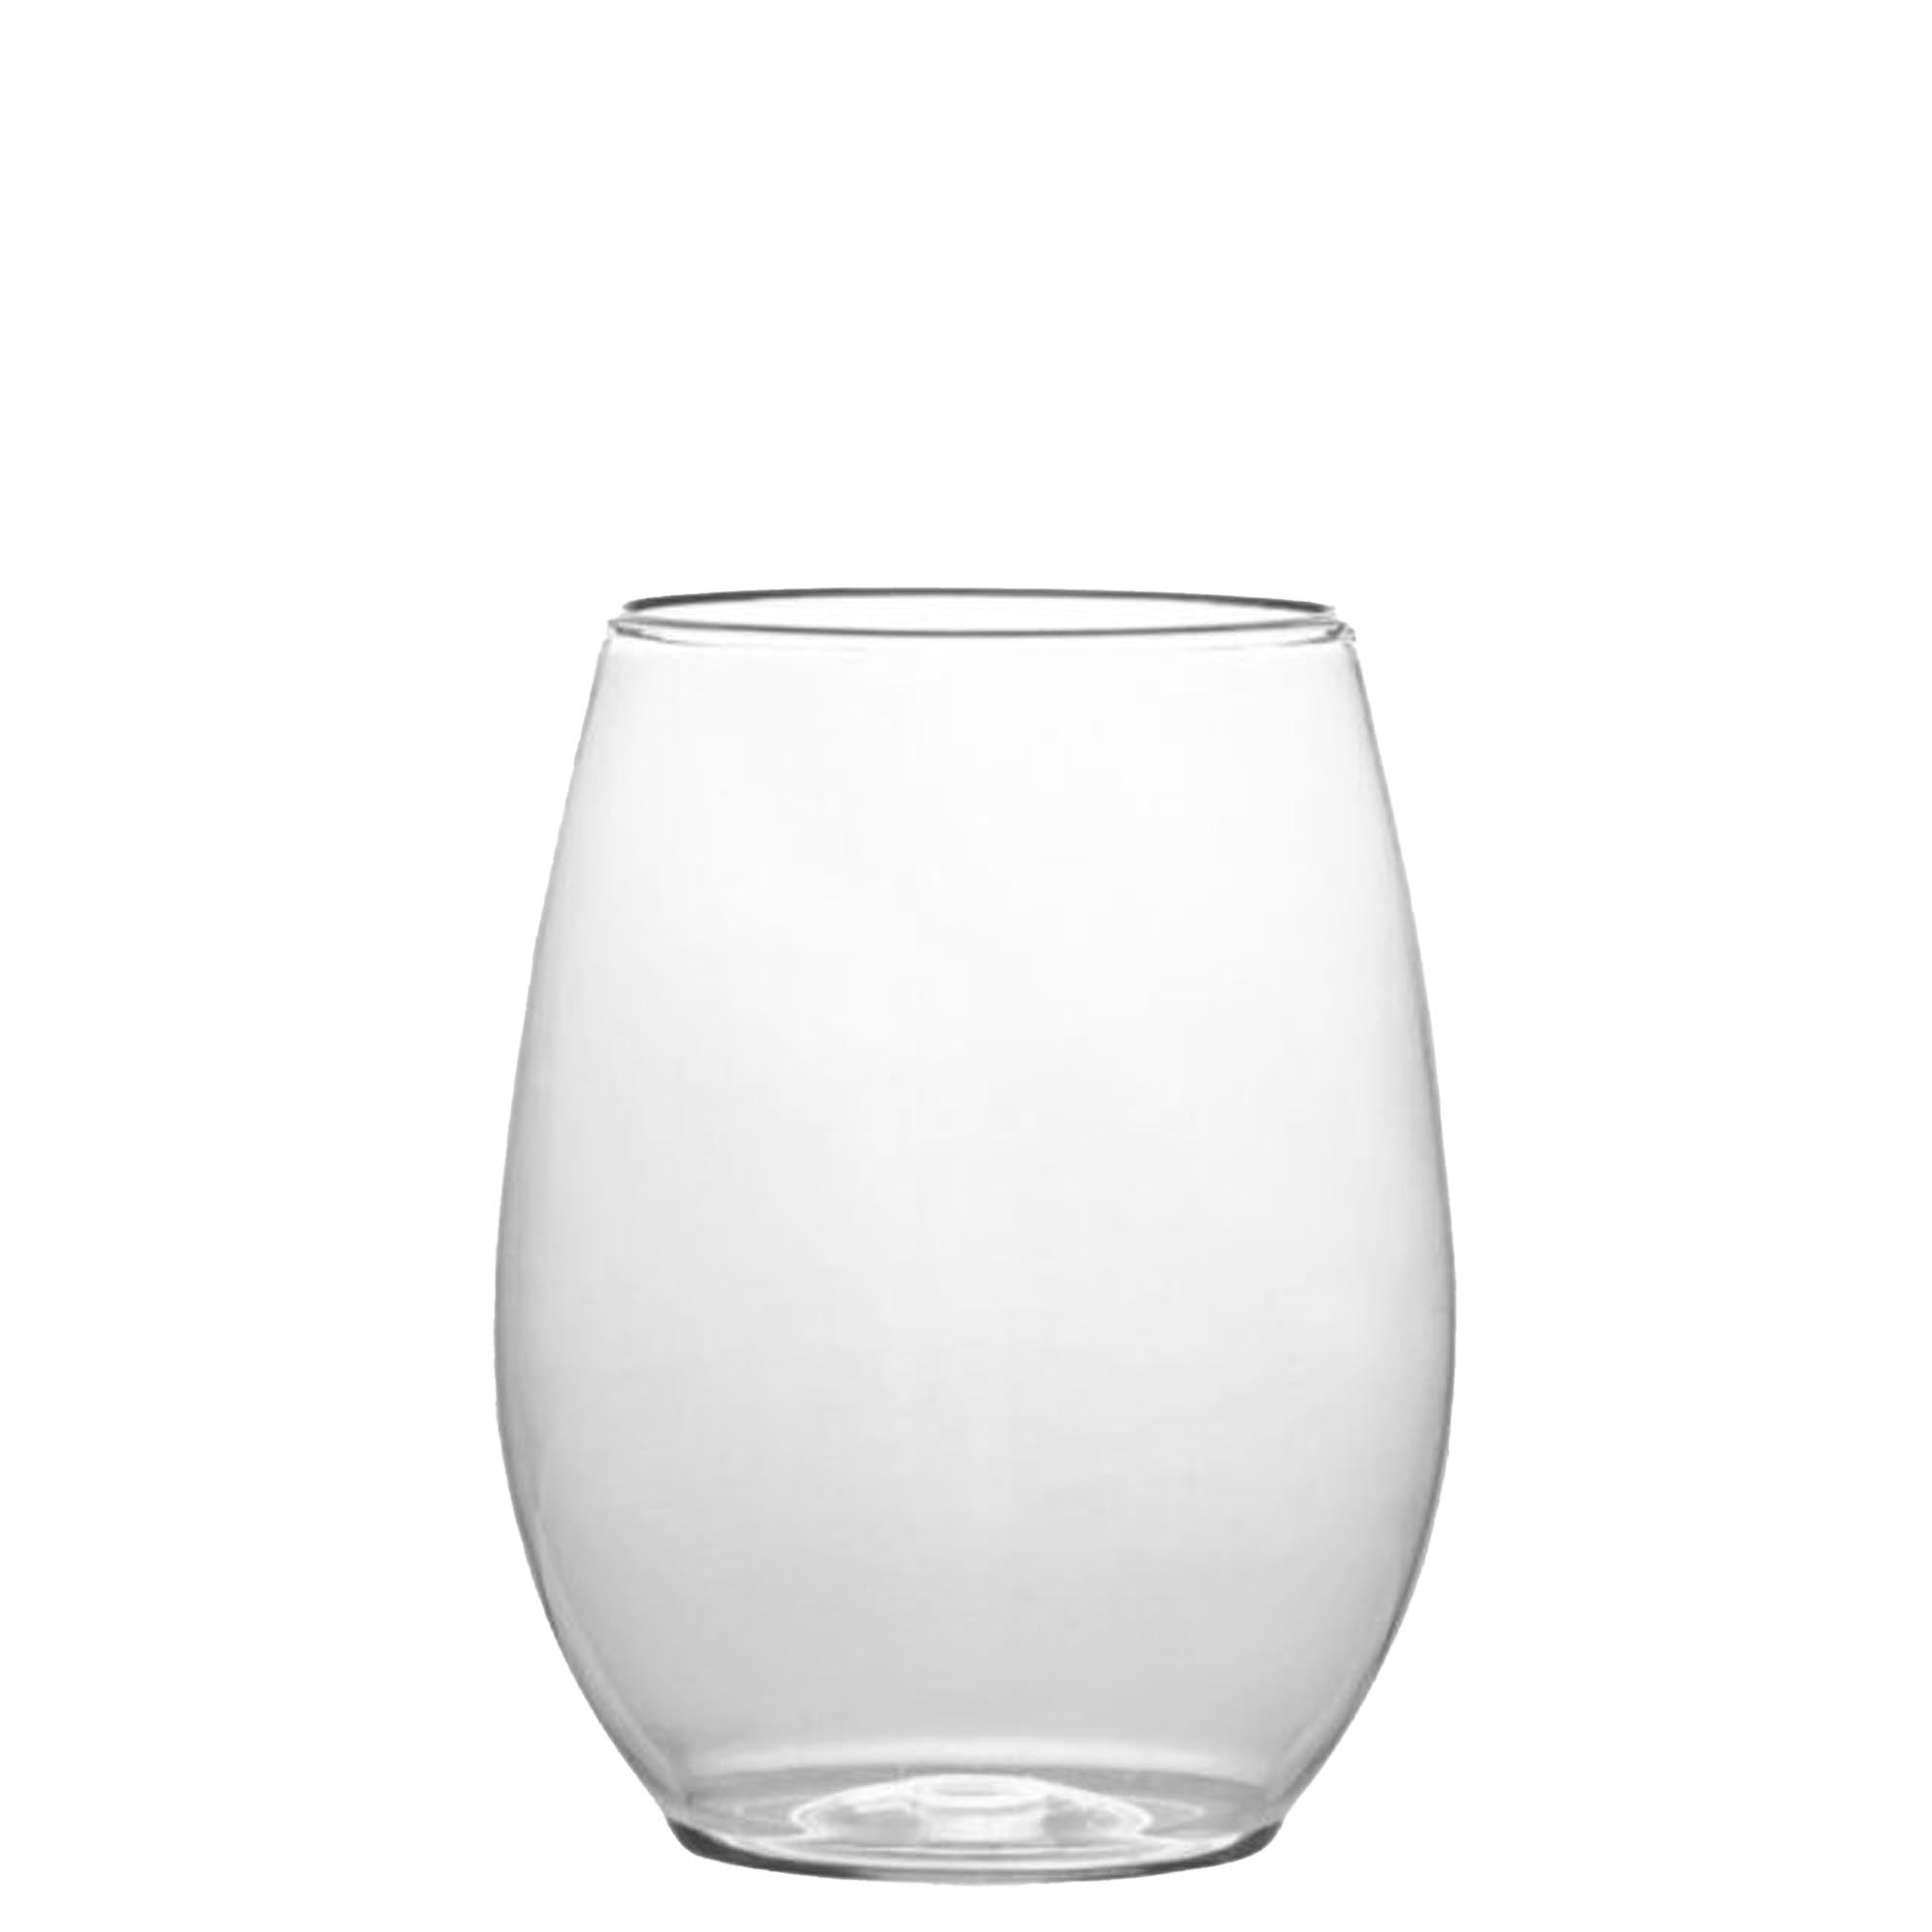 The image depicts a 12oz Elegant Plastic Stemless Clear Wine Tumbler. The tumbler is made of durable and transparent plastic material, allowing the user to enjoy the visual appeal of their beverage. It features a stemless design, providing a modern and sleek aesthetic. The tumbler has a capacity of 12 ounces, making it suitable for serving a standard-sized glass of wine. Its smooth and polished surface adds to its elegance, while the clear construction showcases the color and clarity of the wine within.